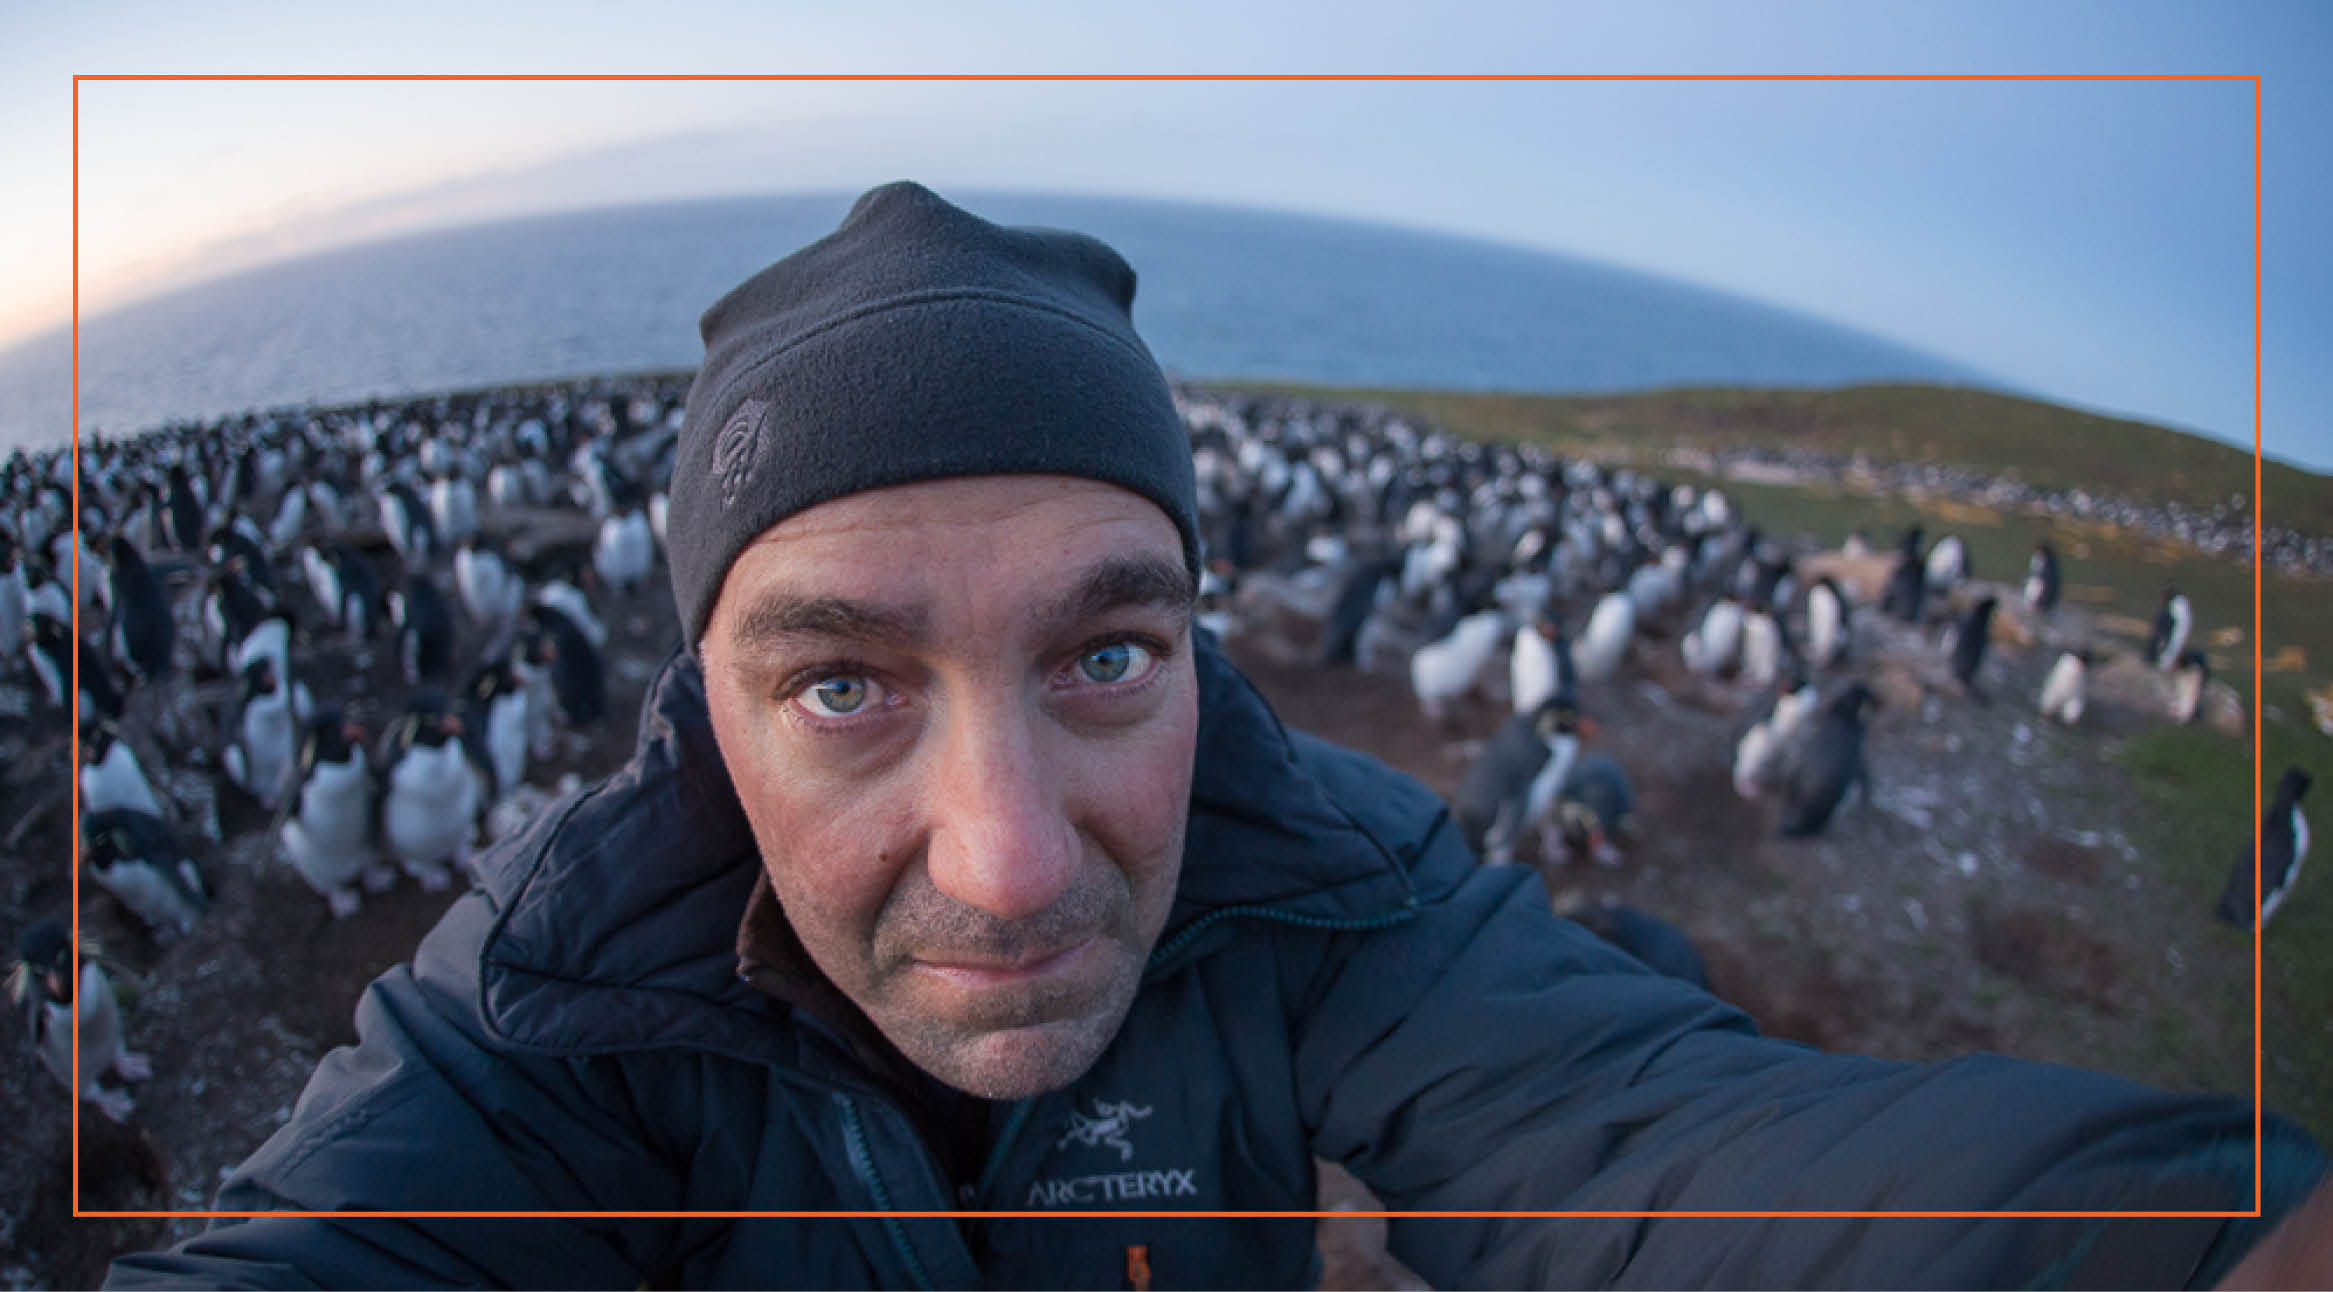 a selfie by Sean Crane surrounded by penguins